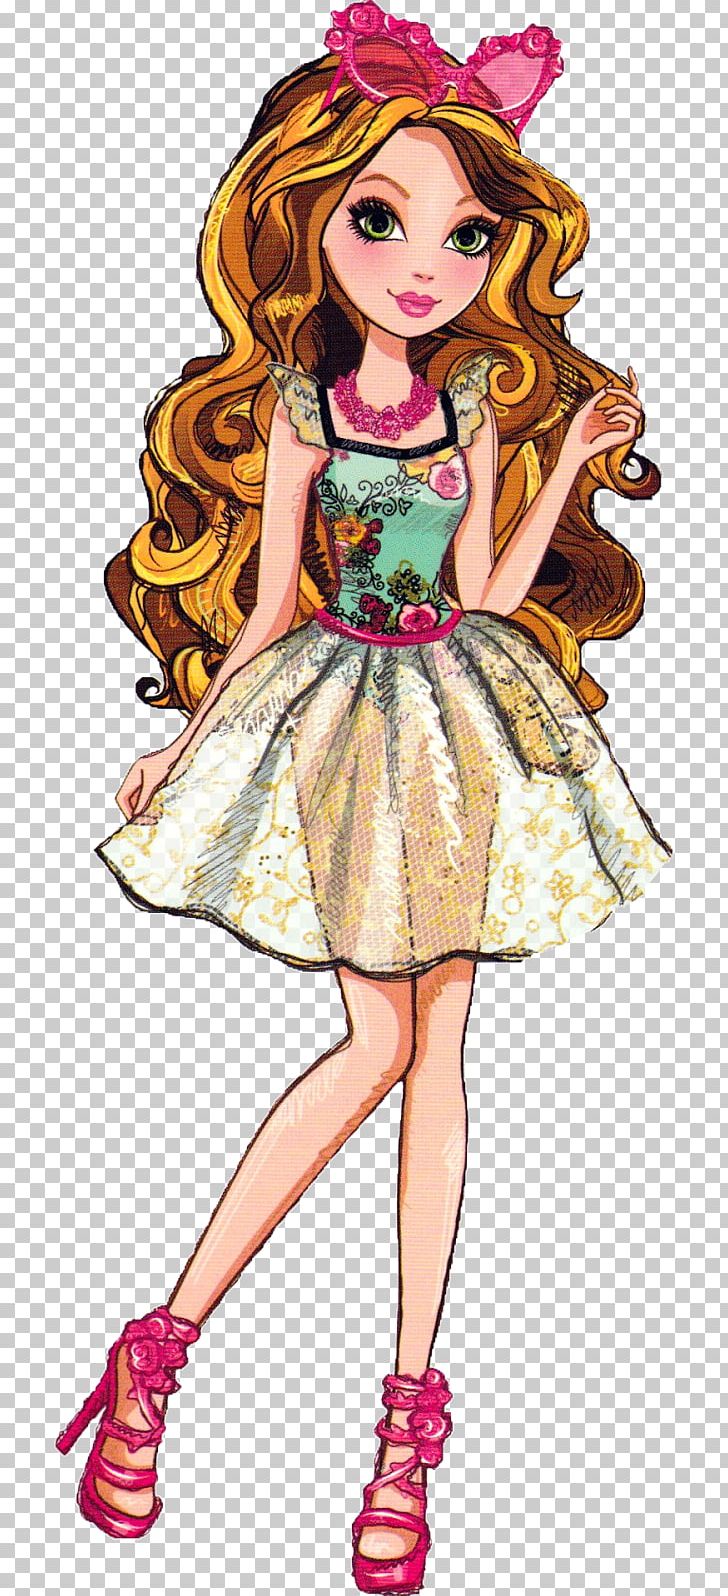 Ever After High Legacy Day Apple White Doll YouTube Queen Of Hearts PNG, Clipart, Anime, Art, Barbie, Brown Hair, Costume Free PNG Download